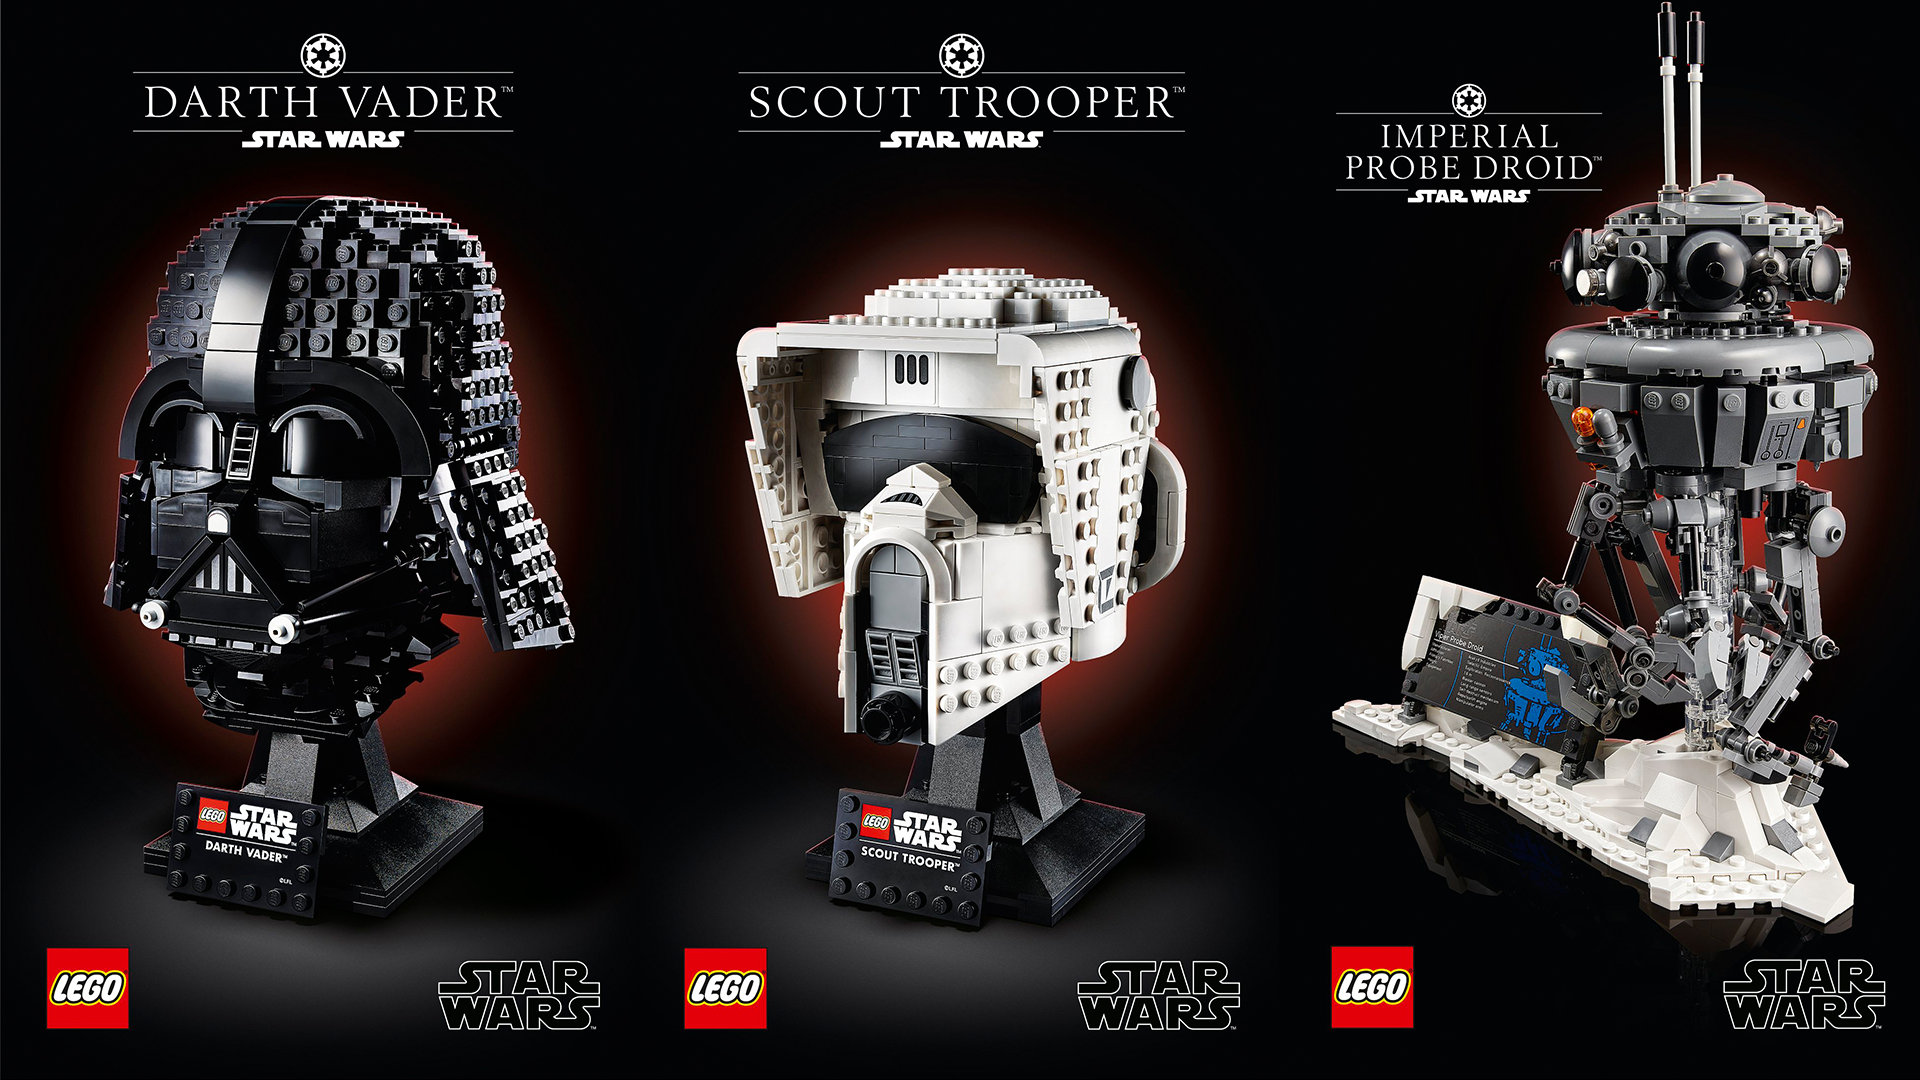 These Current LEGO ‘Megastar Wars’ Helmets and Droid Will Encourage You Feel the Power